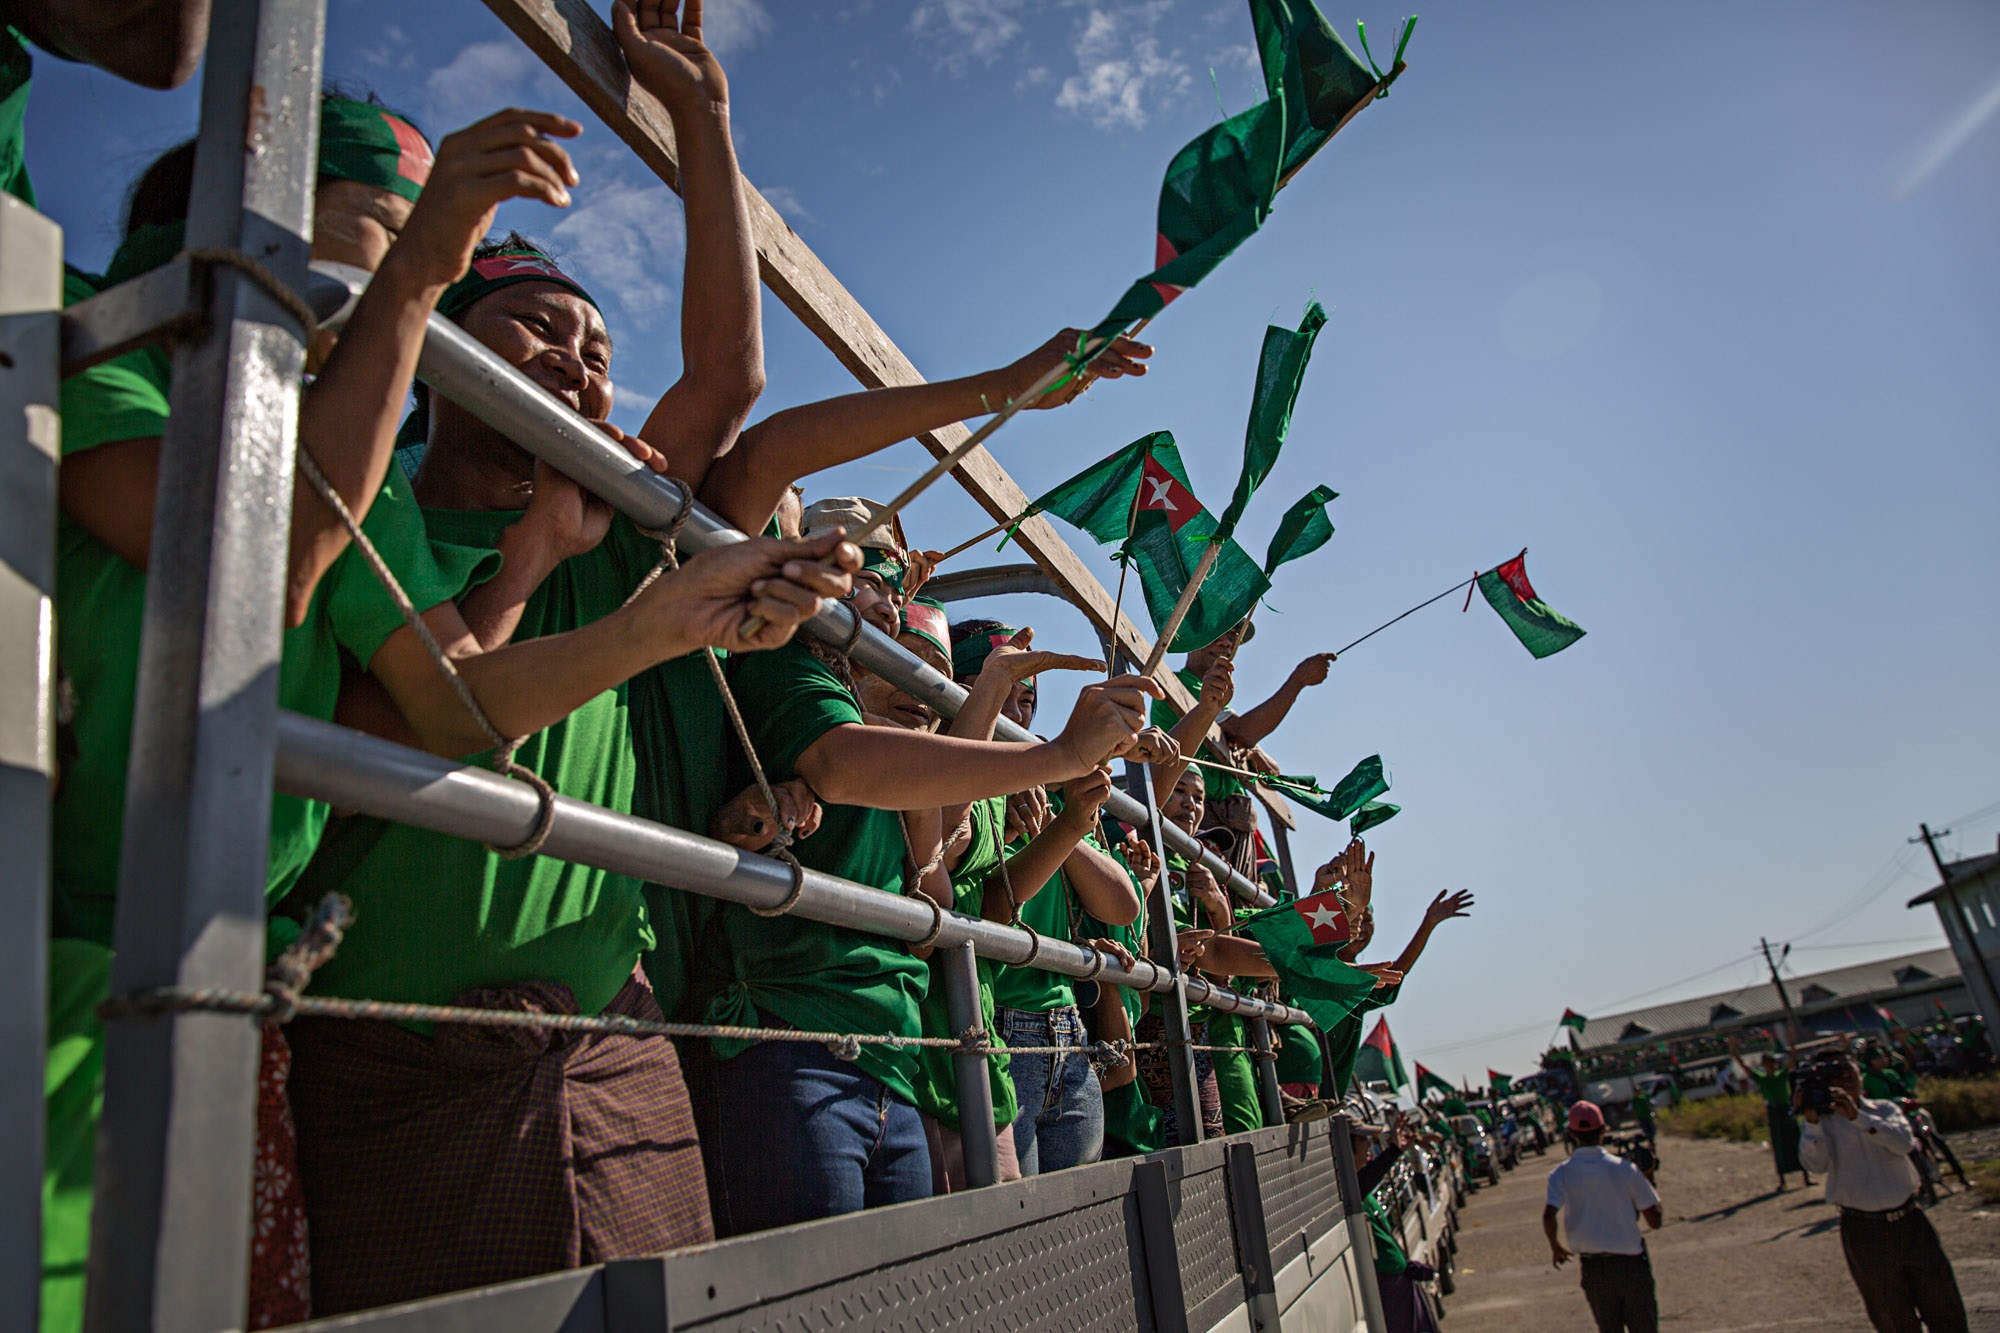 USDP (Union Solidarity and Development Party) supporters wave flags during a rally near Hinthada, Myanmar, November 2015.